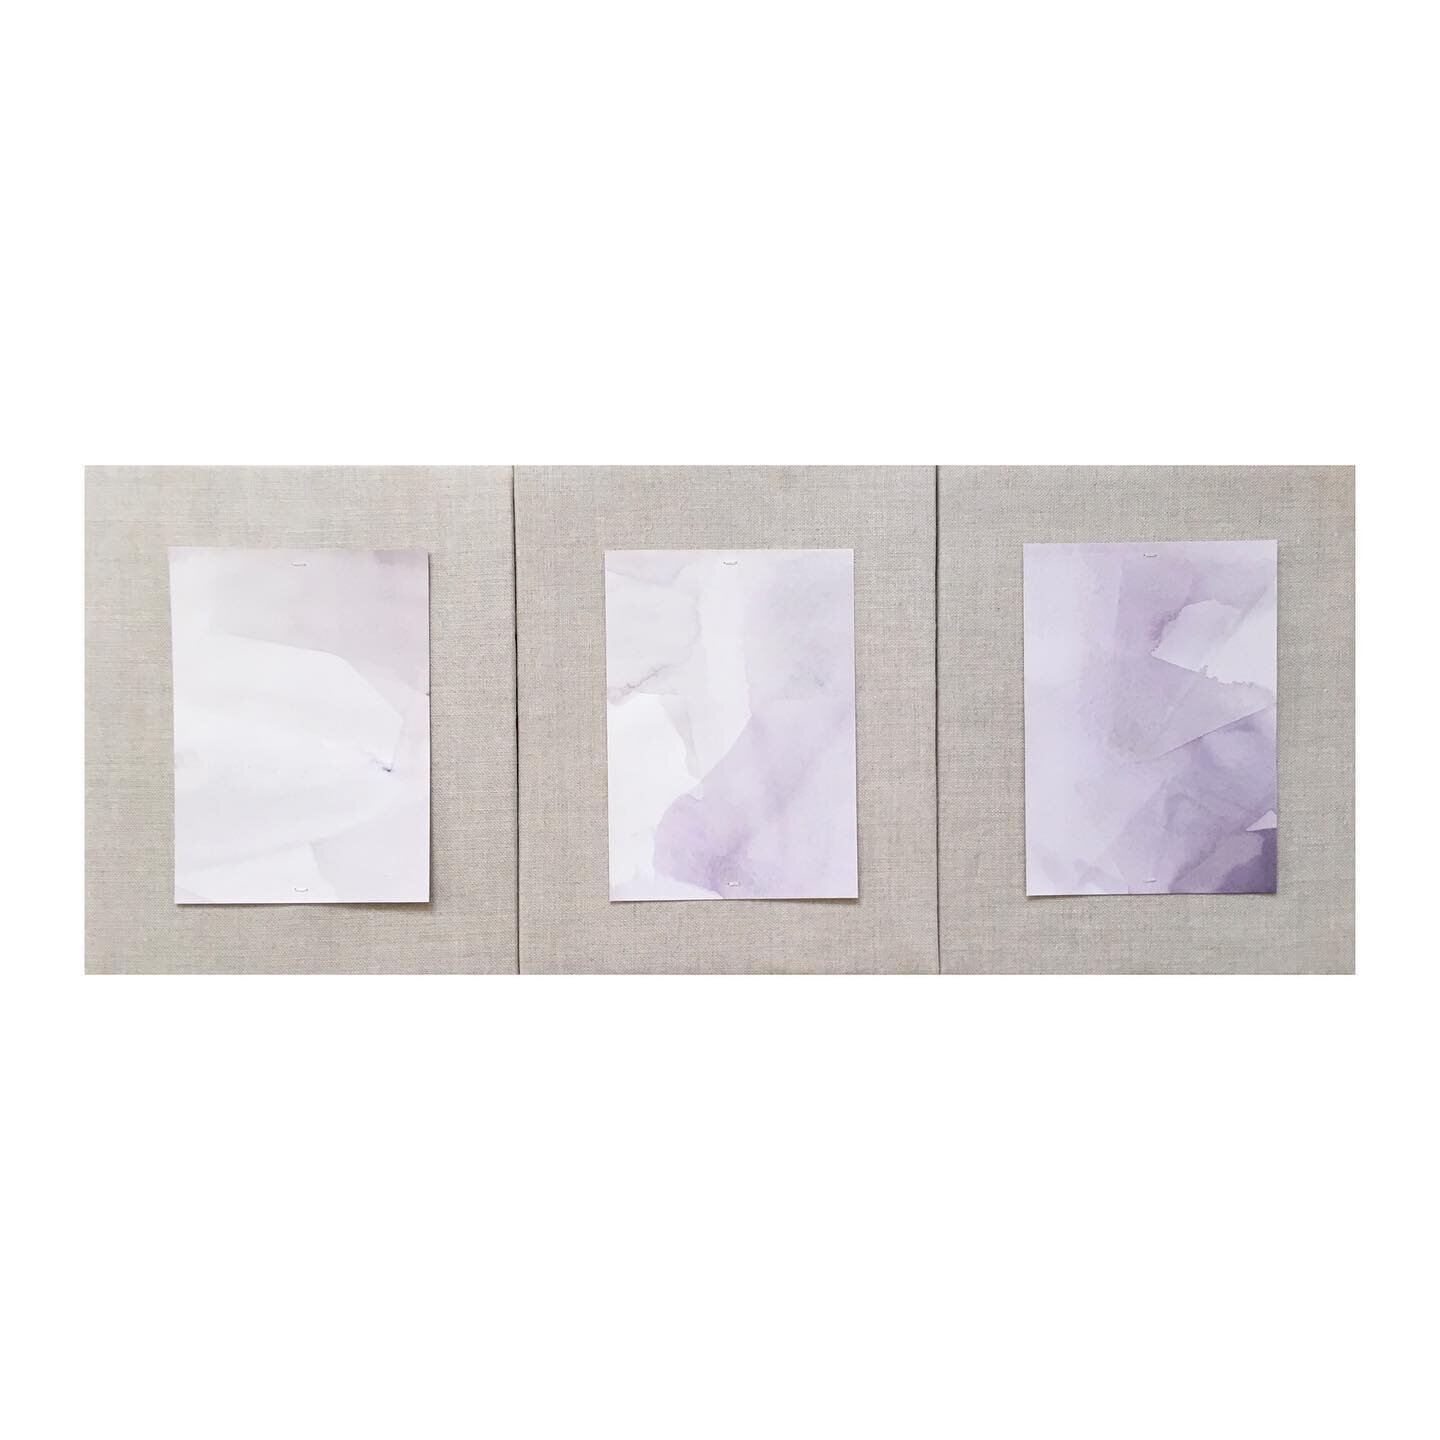 New Artwork Available on my website | amethyst crystal pigment abstracts - two small scale triptychs available as individual paintings as well. 

This was originally from a really fun collaboration with @thecristalline.

See my stories for the detail